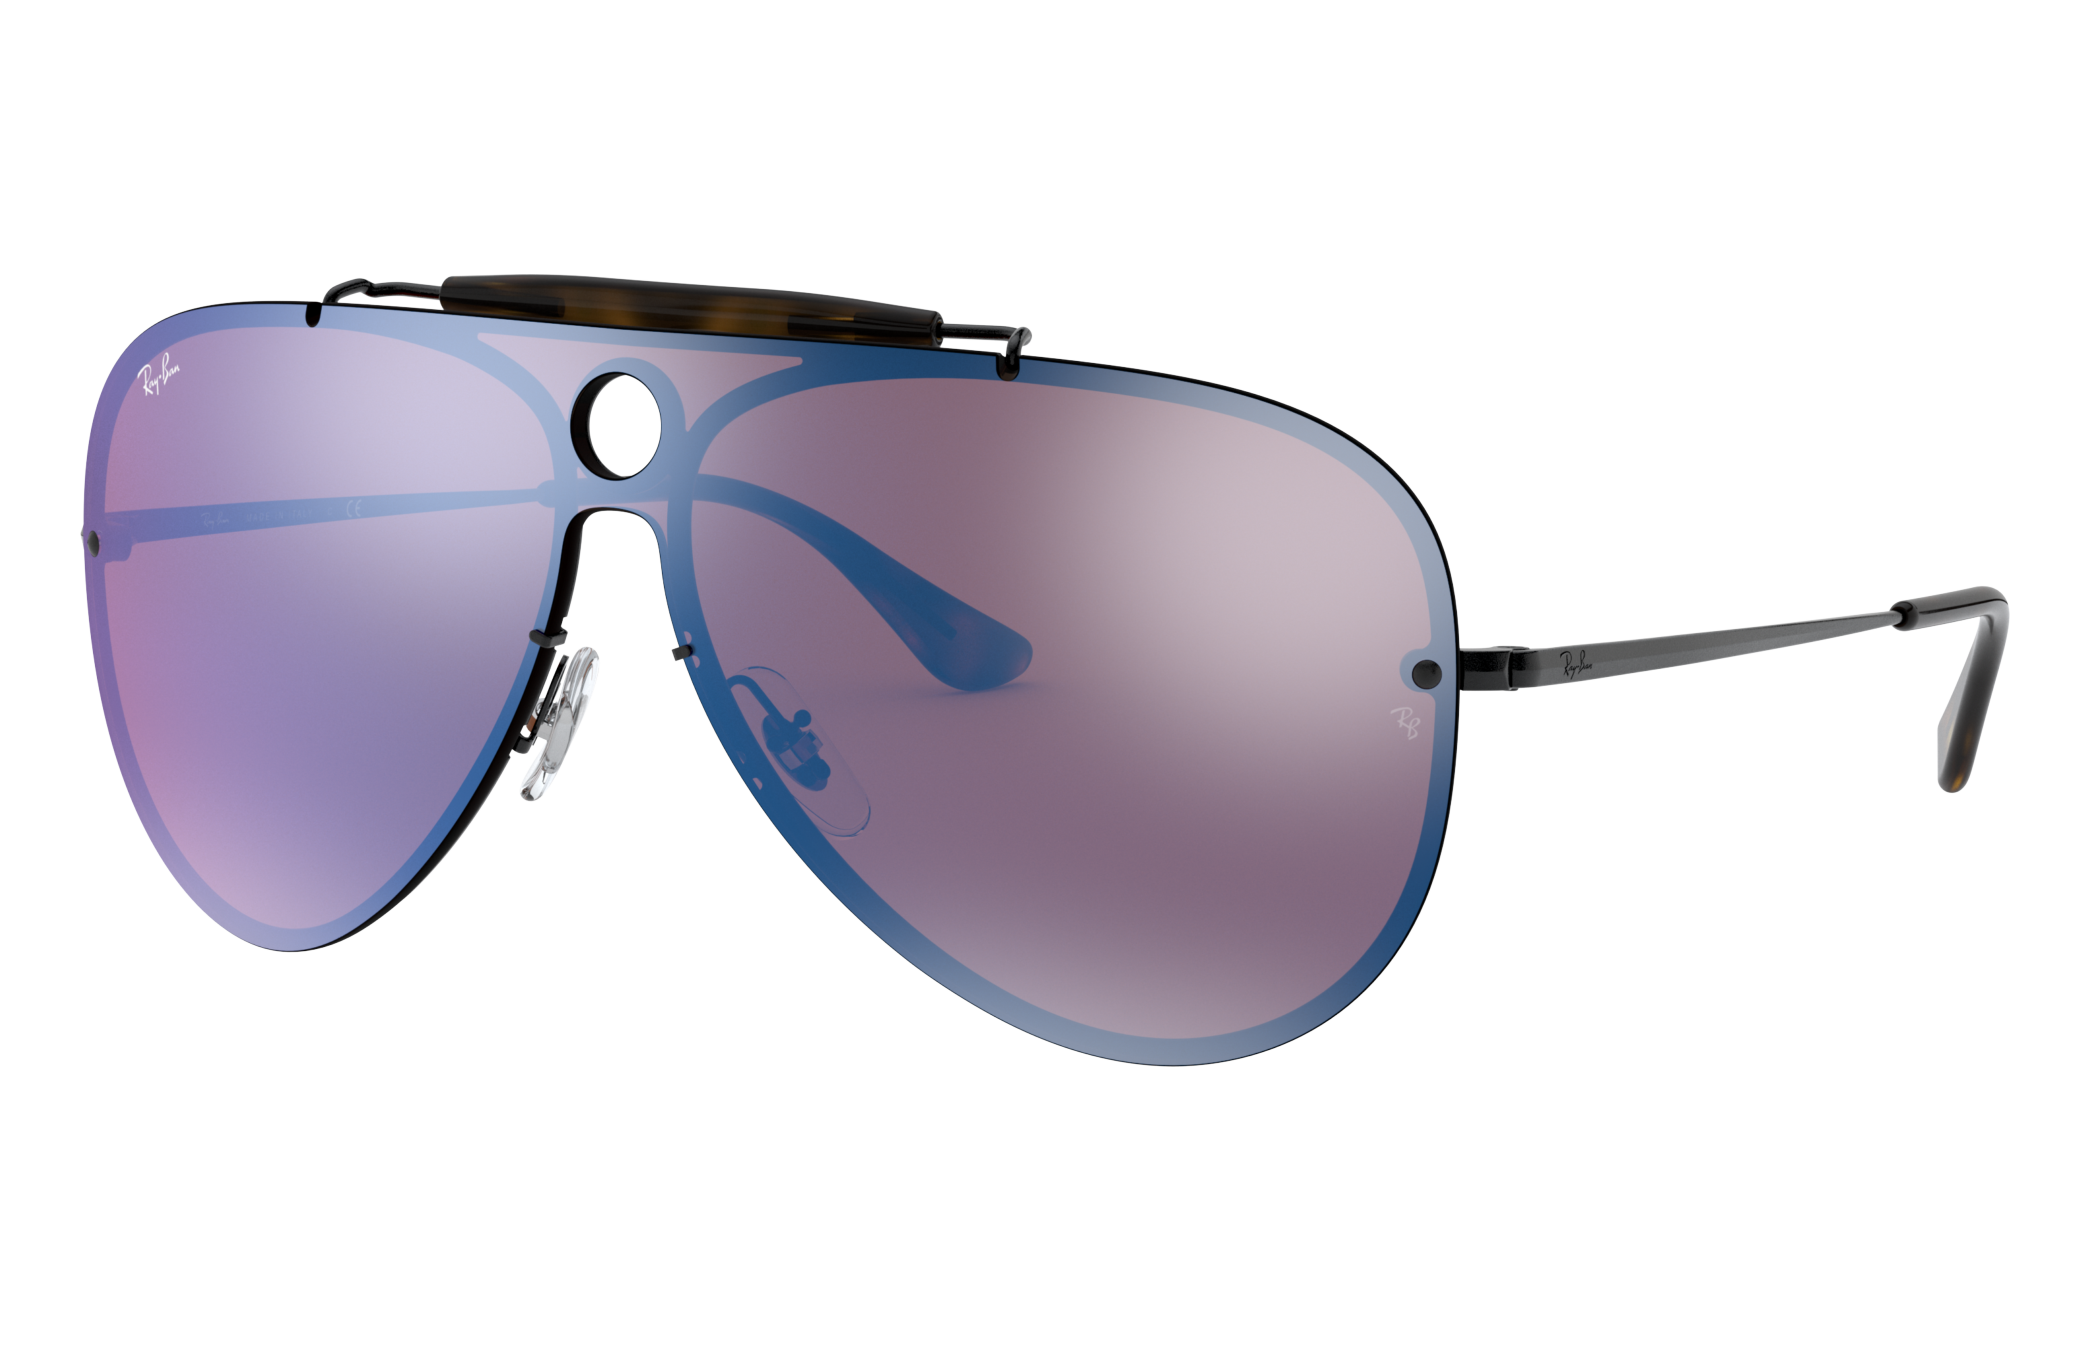 Blaze Shooter Sunglasses in Black and Violet/Blue | Ray-Ban®